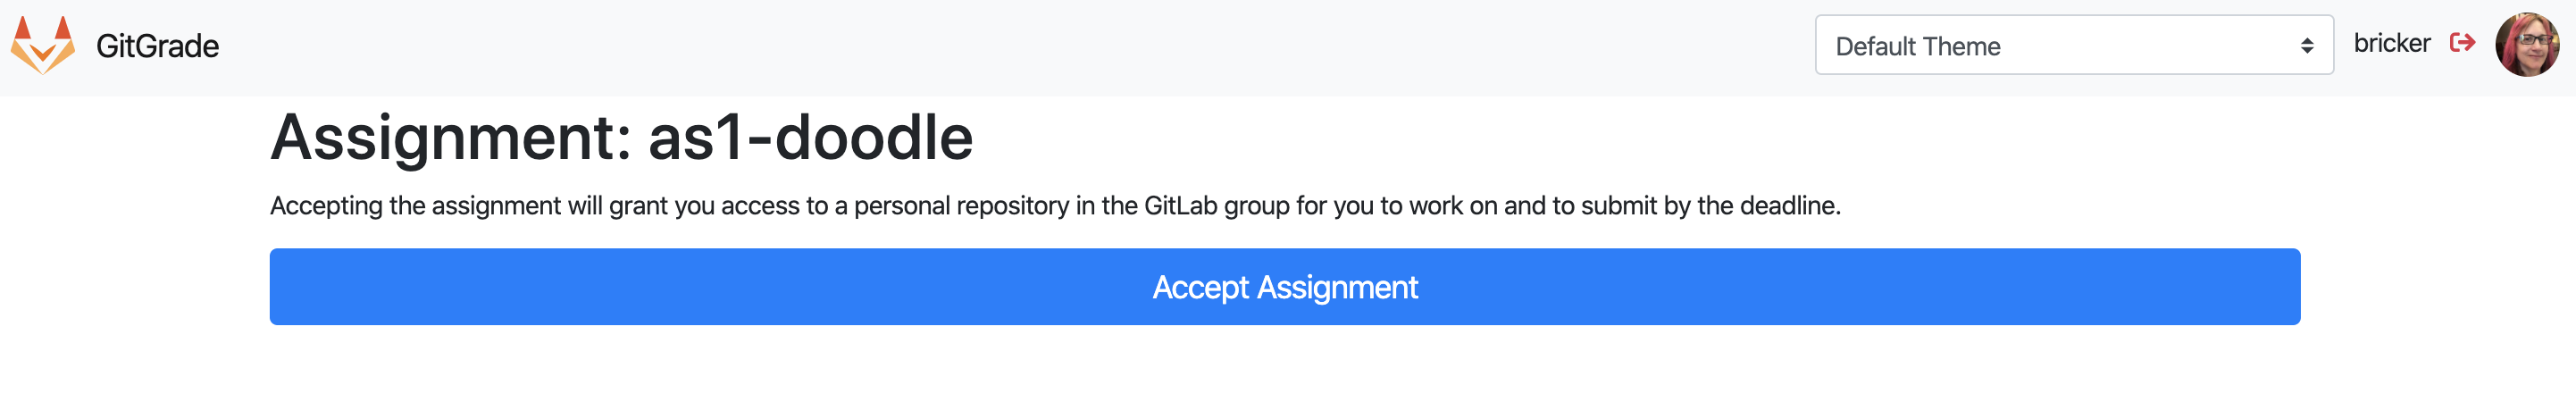 Gitgrade accept assignment page, assignment not accepted yet, 50%